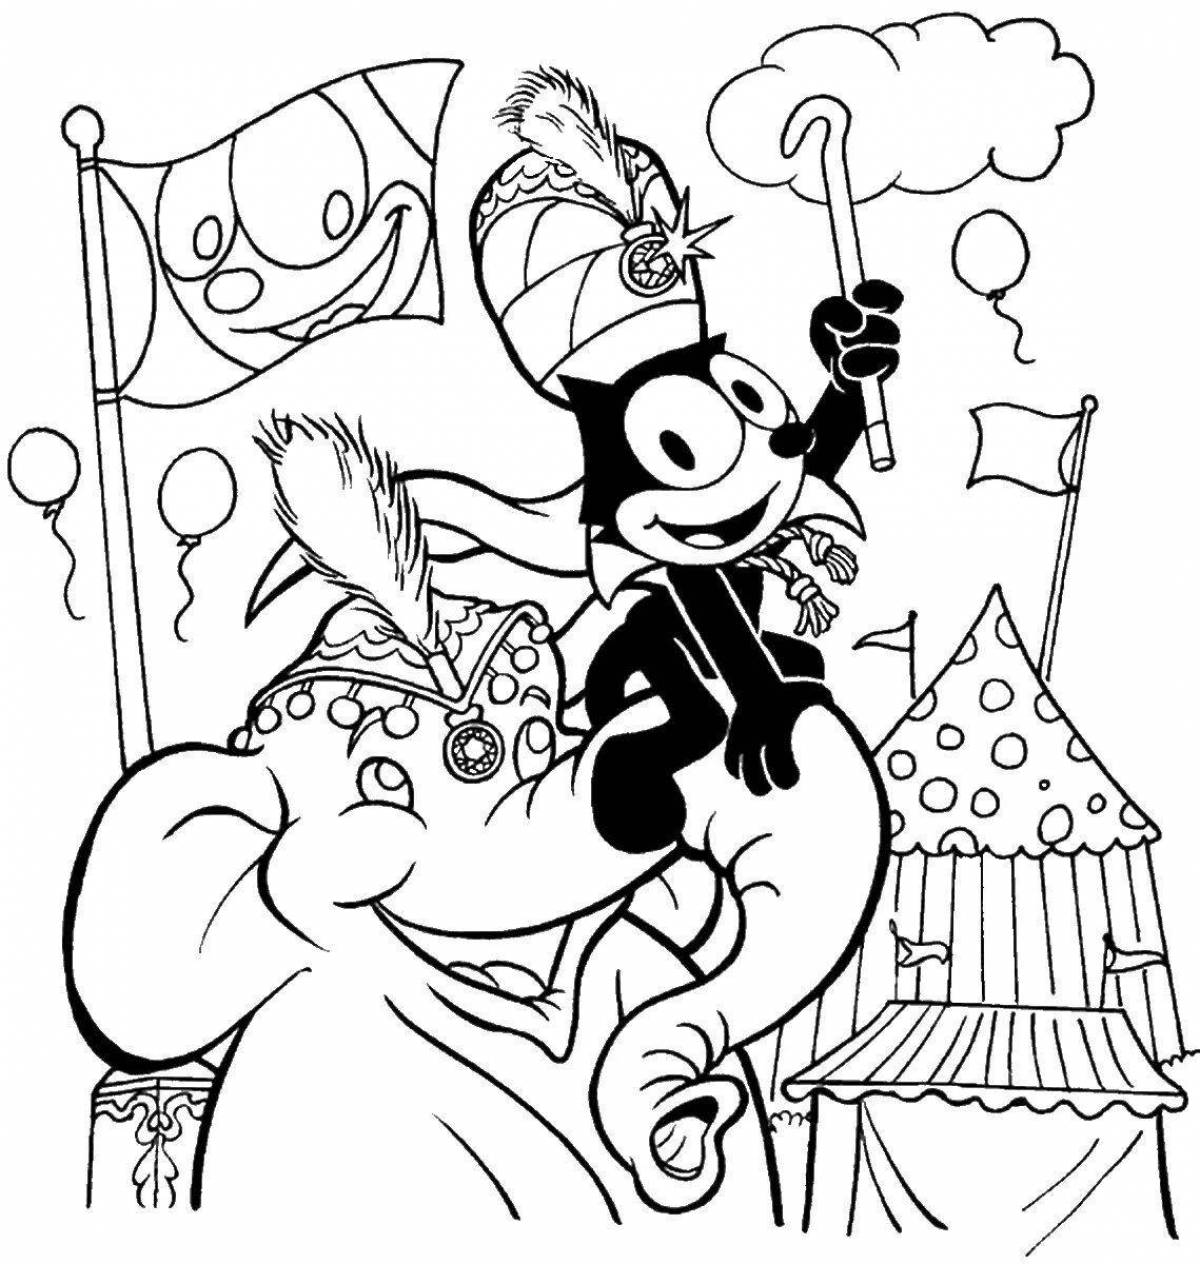 Felix the cat sparkling coloring page